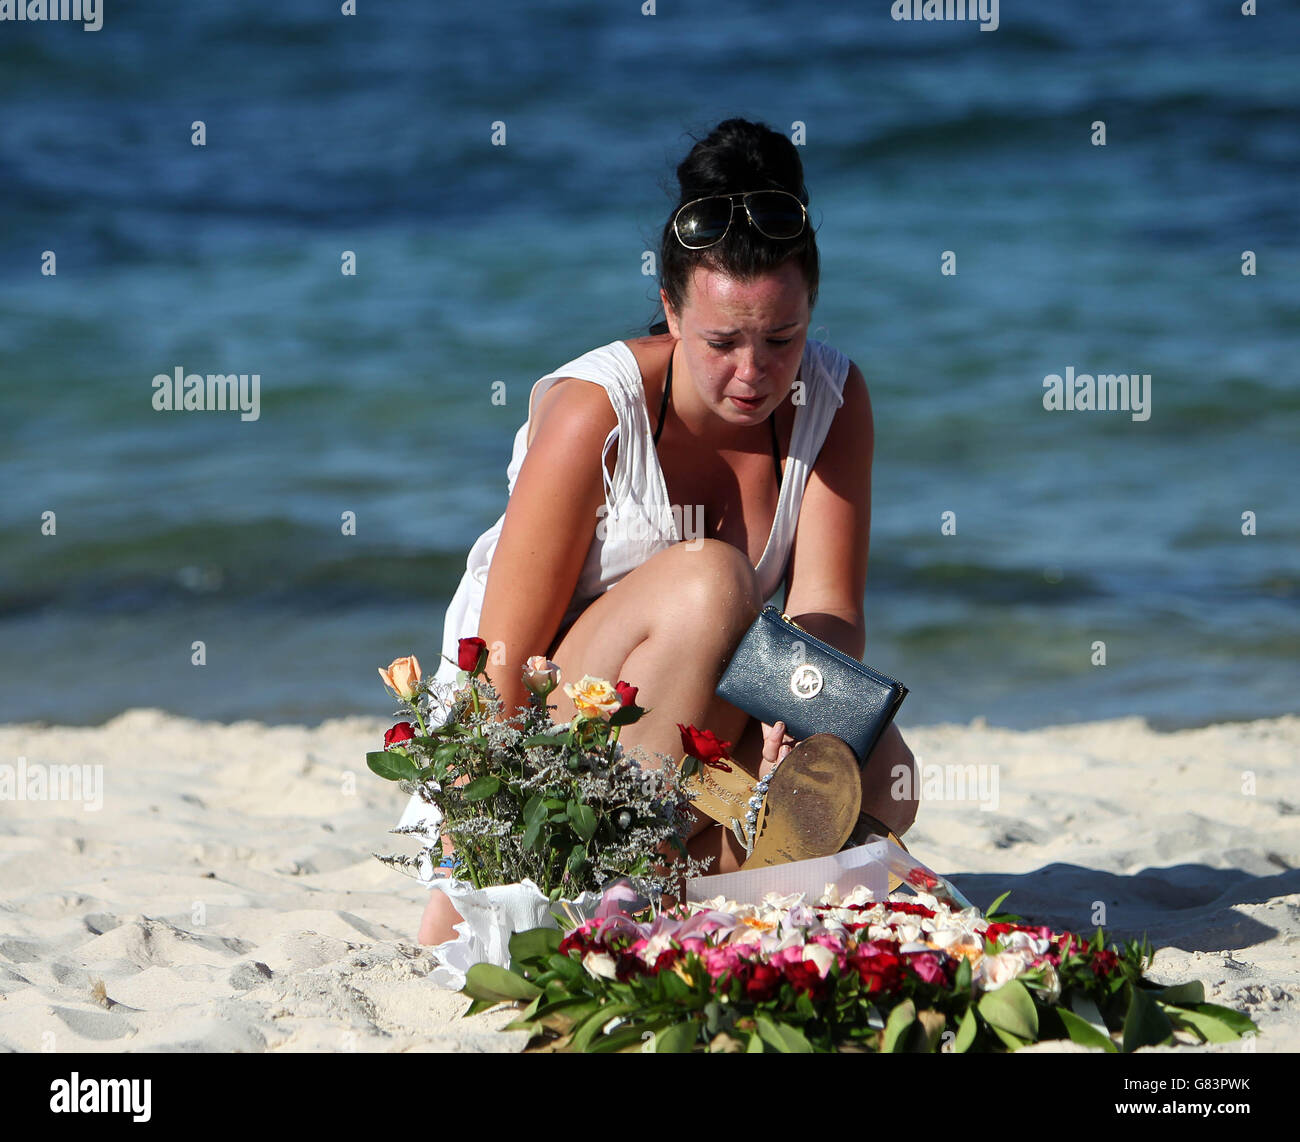 A woman looks at floral tributes on the beach near the RIU Imperial Marhaba hotel in Sousse, Tunisia, as British holidaymakers defy the terrorists and continue to stay in Sousse despite the bloodbath on the beach. PRESS ASSOCIATION Photo. Picture date: Tuesday June 30, 2015. The sands at Sousse were quiet and calm today as tourists and locals alike continued to pay their respects to the 38 dead outside the RIU Imperial Marhaba and Bellevue hotels. Flowers continue to be laid at three heart-shaped memorials that mark where so many people lost their lives, with many people in tears as theyy Stock Photo